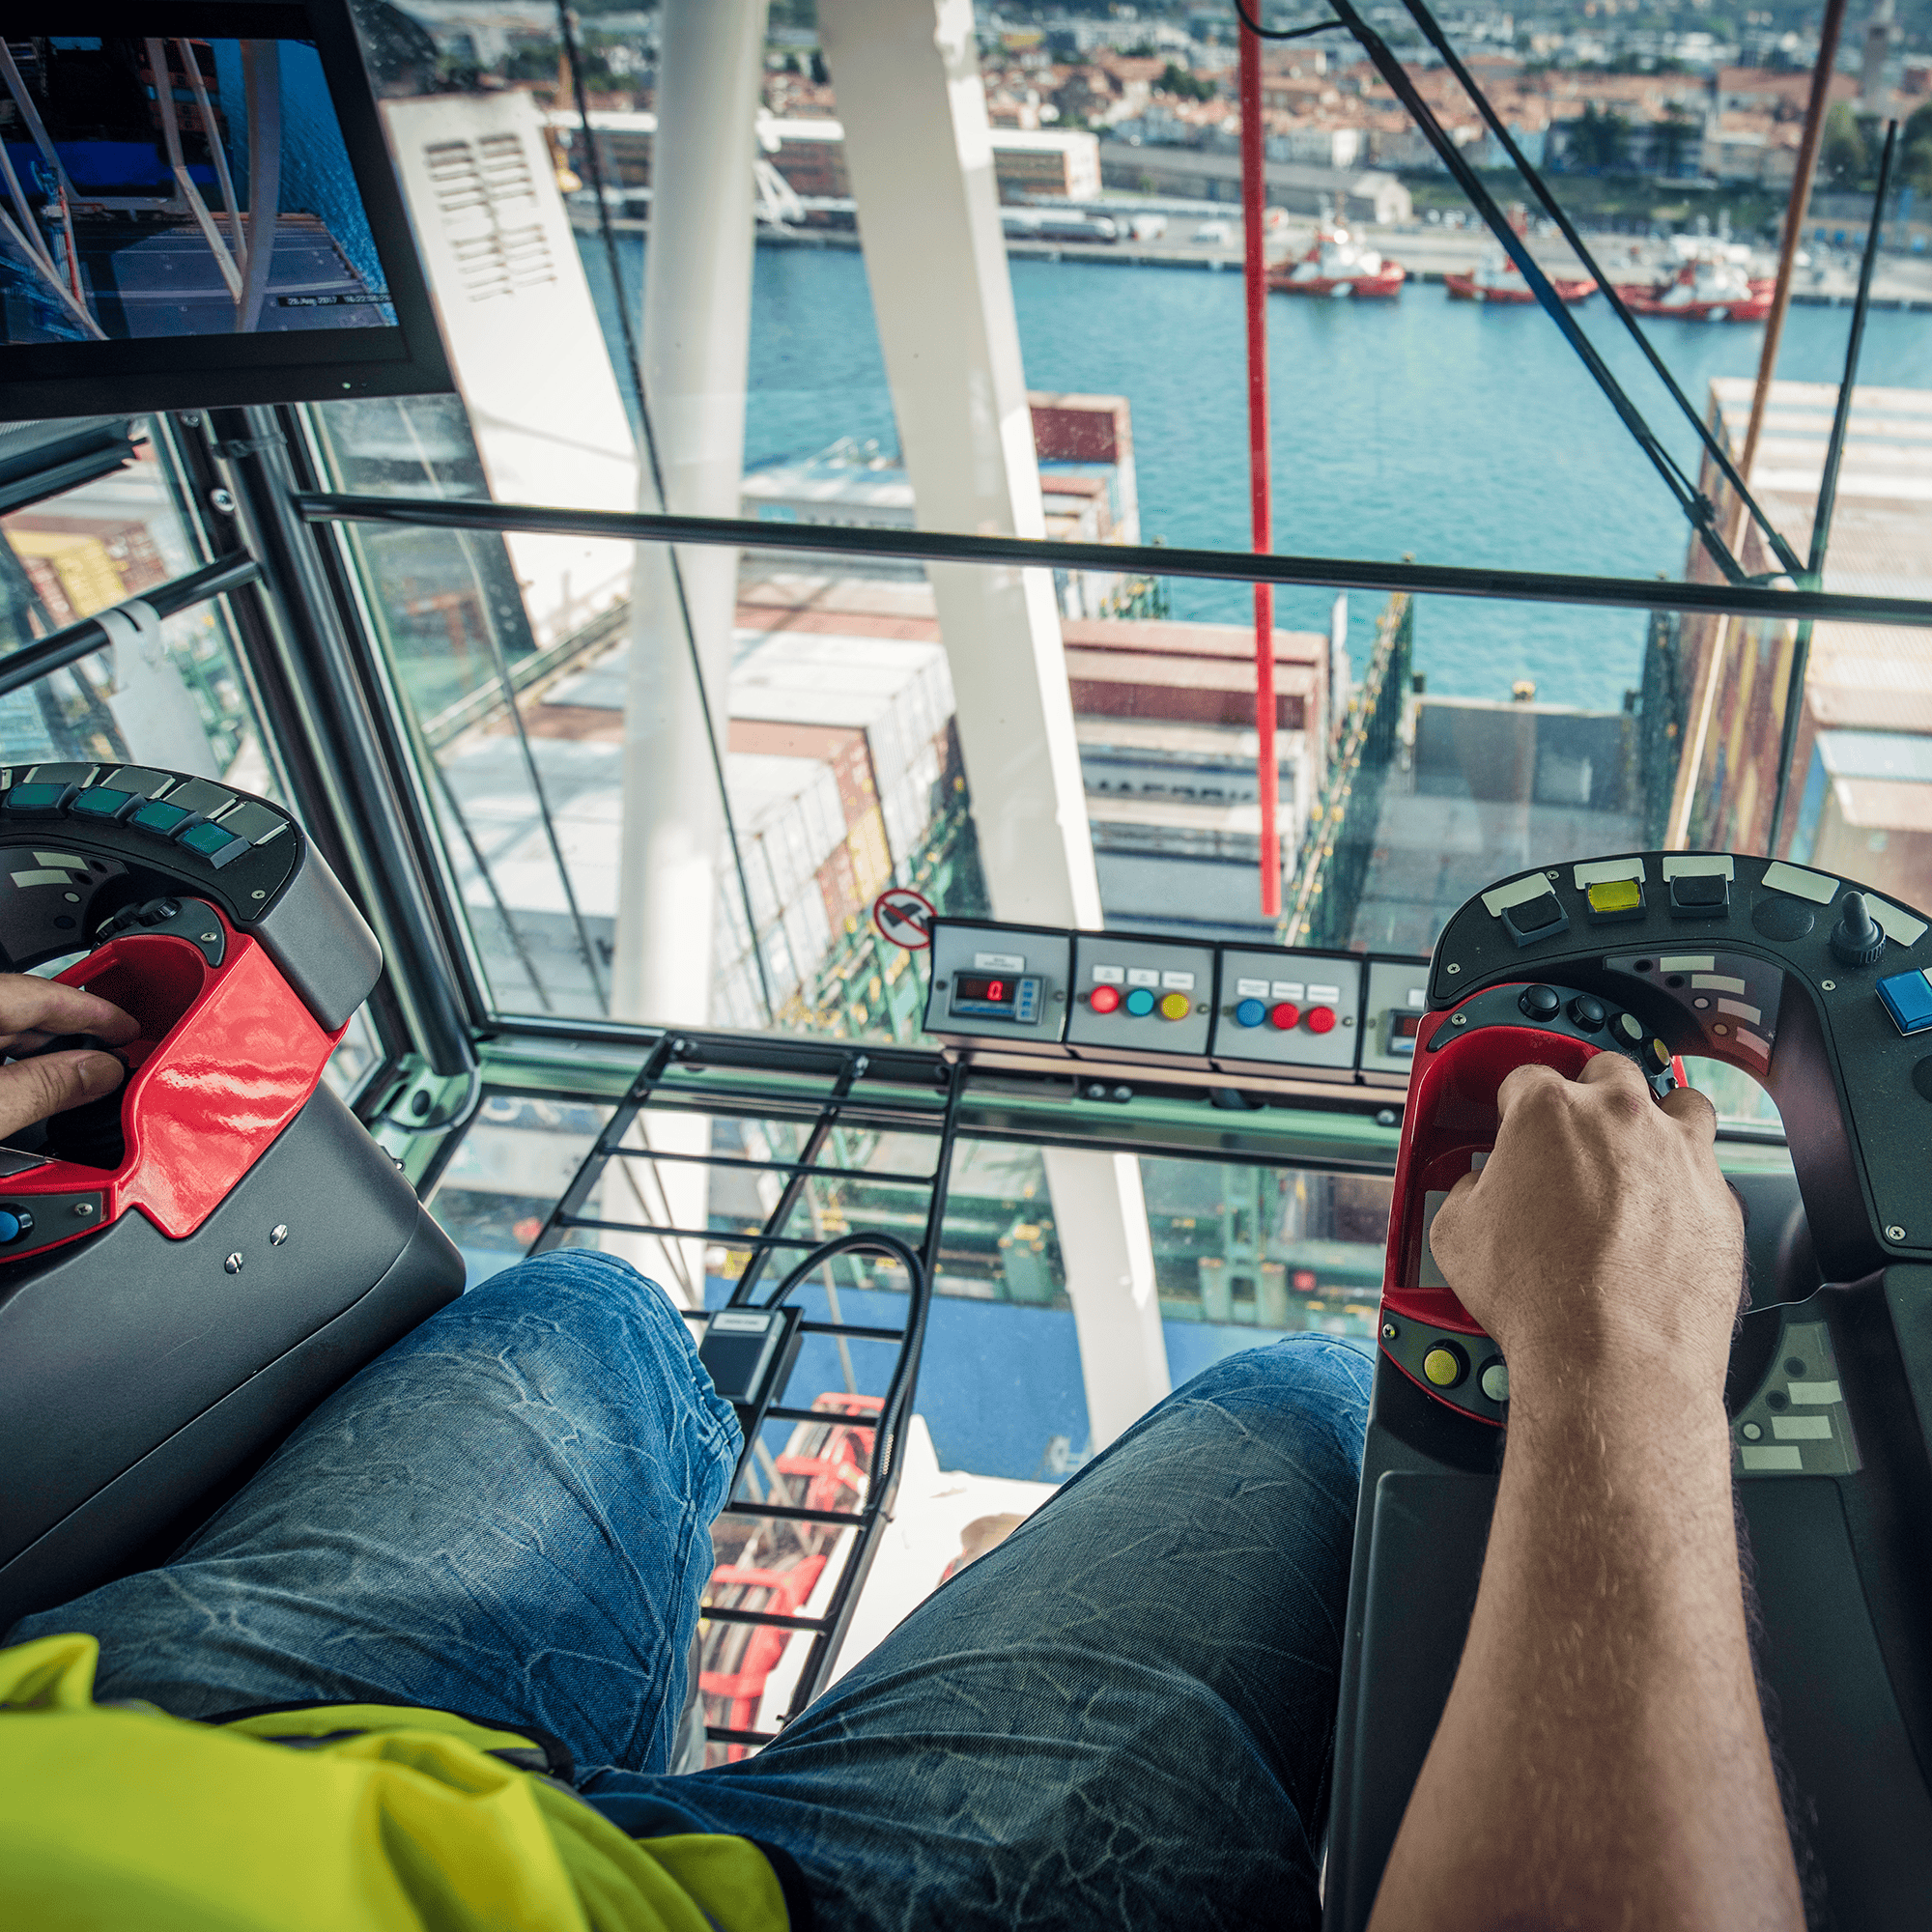 The inside of a crane cab overlooking a city